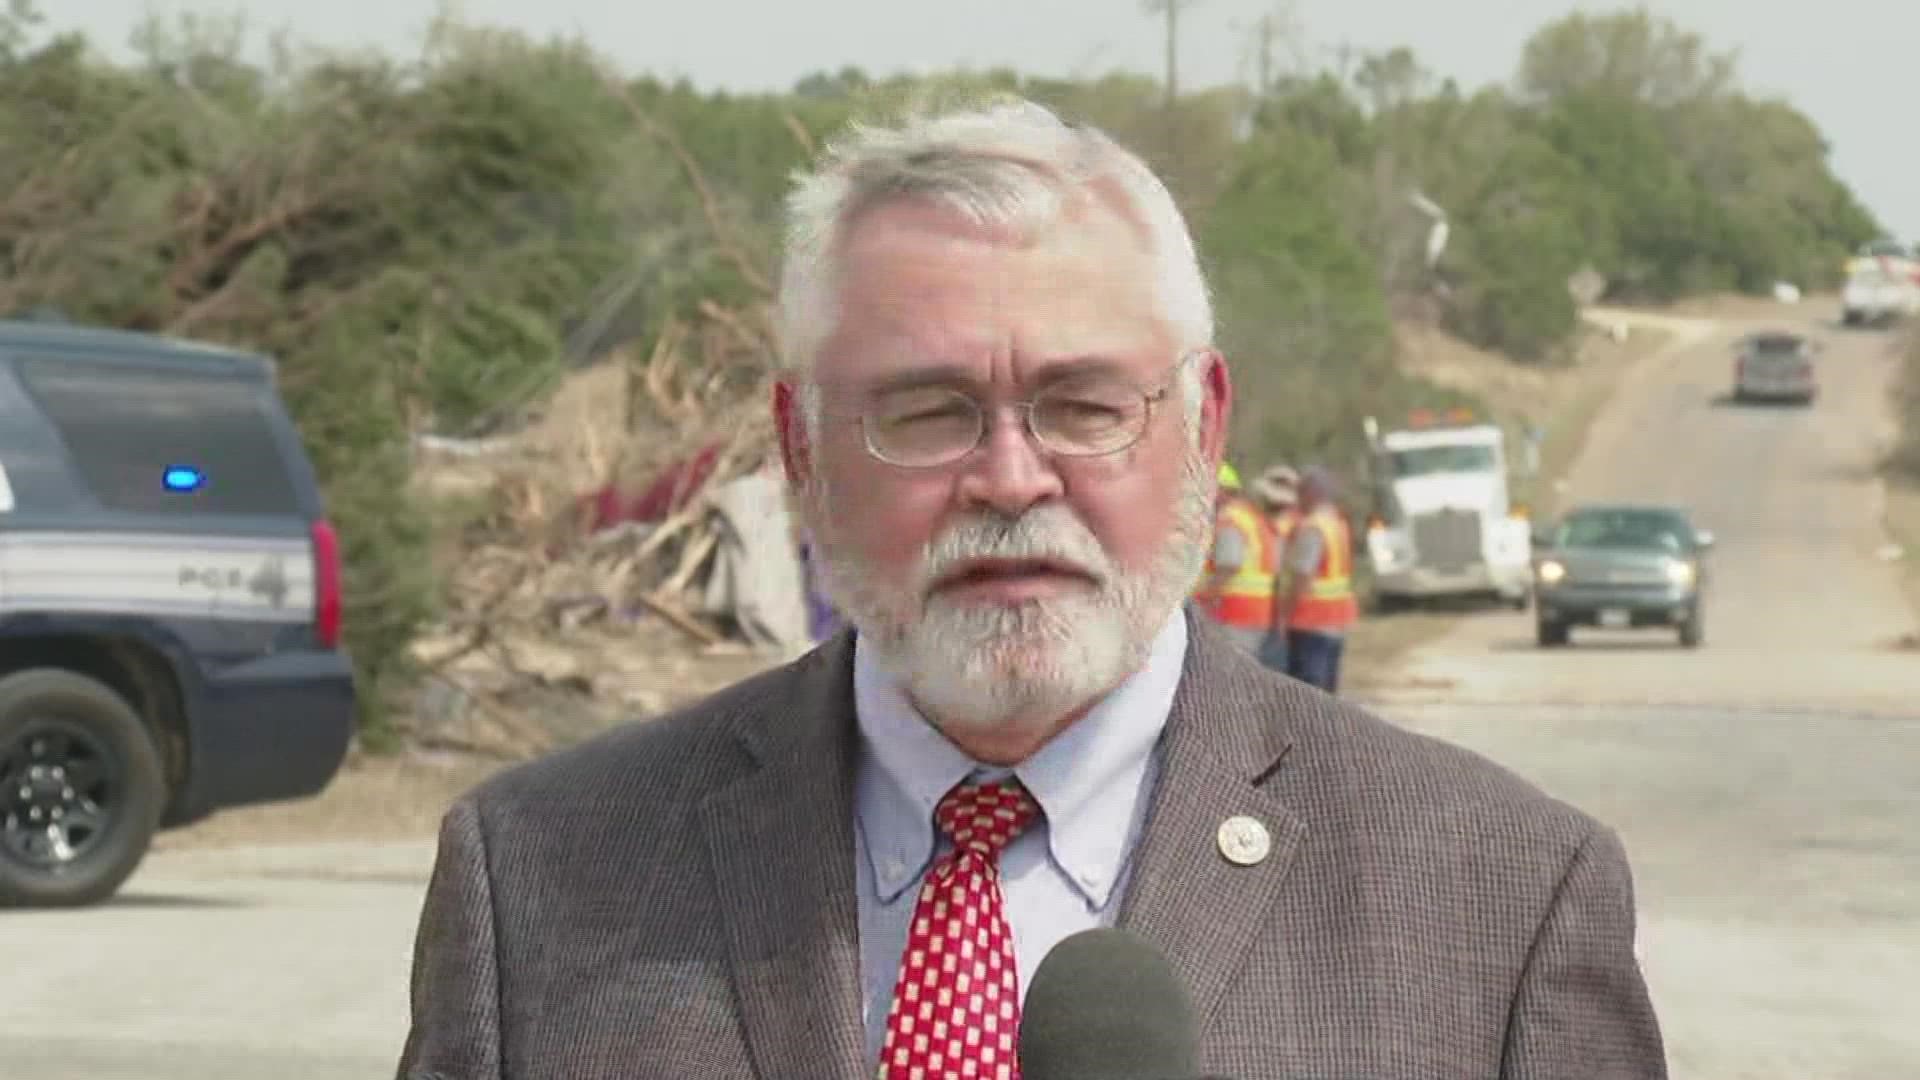 Judge David Blackburn said the tornado was about a quarter-mile wide and traveled for 8 miles.